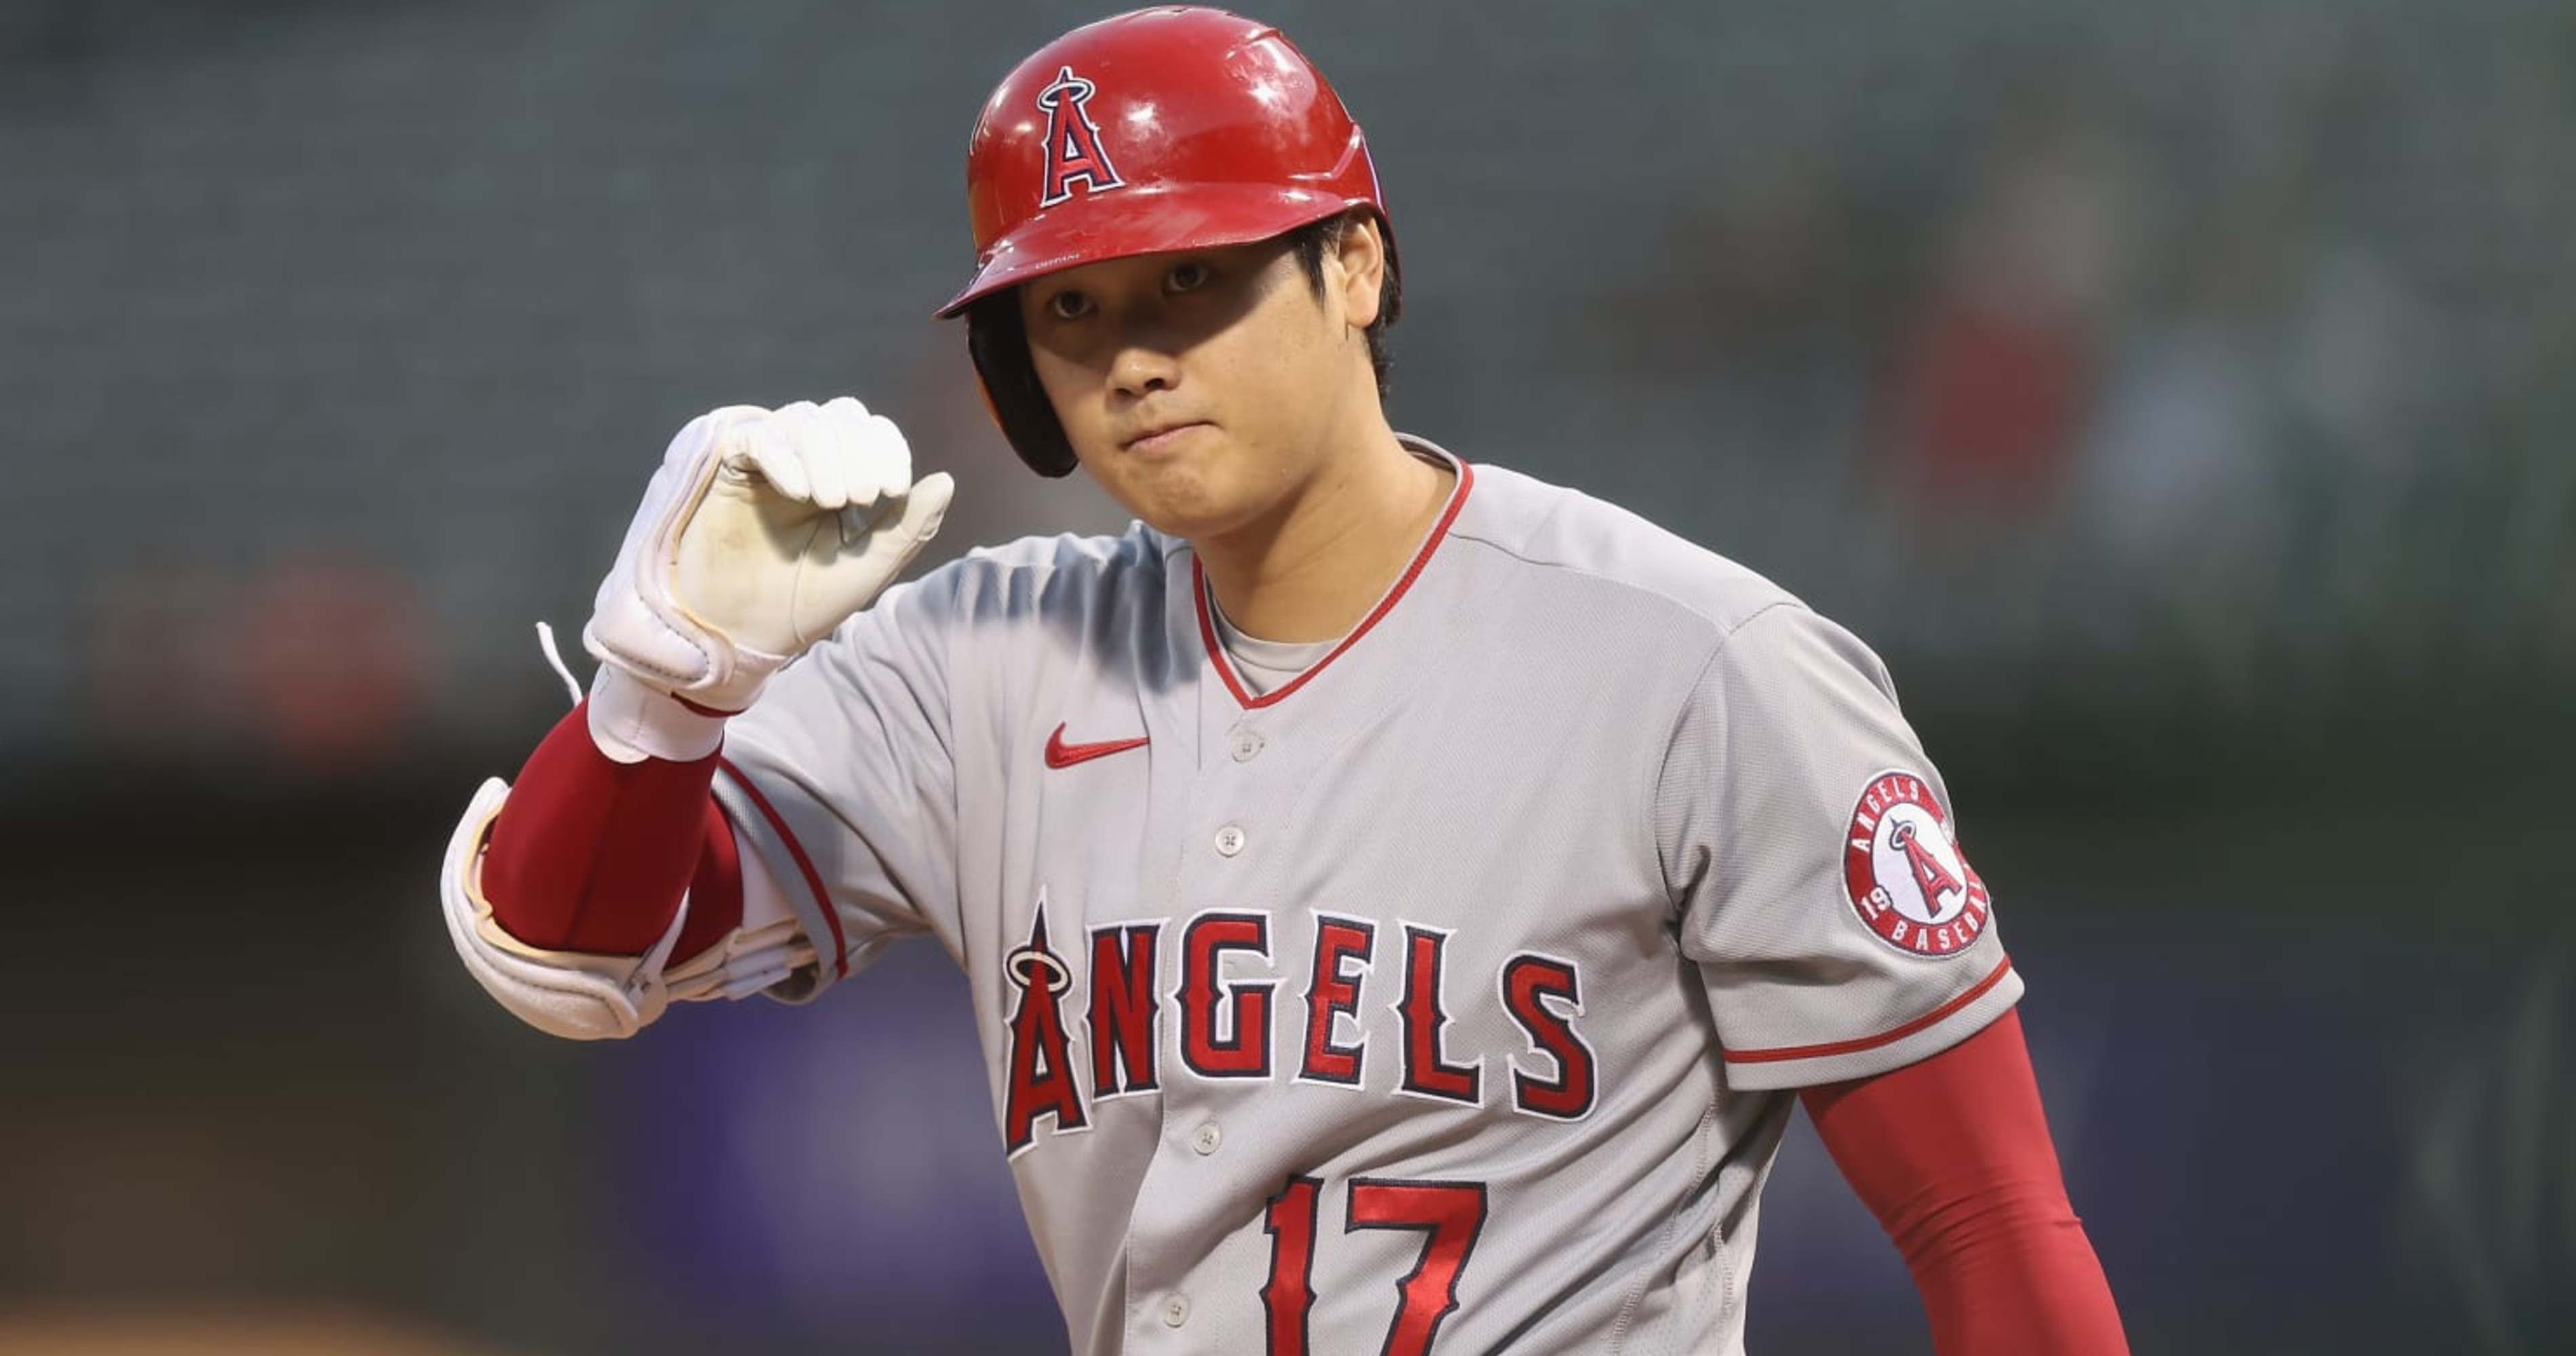 Shohei Ohtani clears locker, Angels decline to say why – NBC Los Angeles